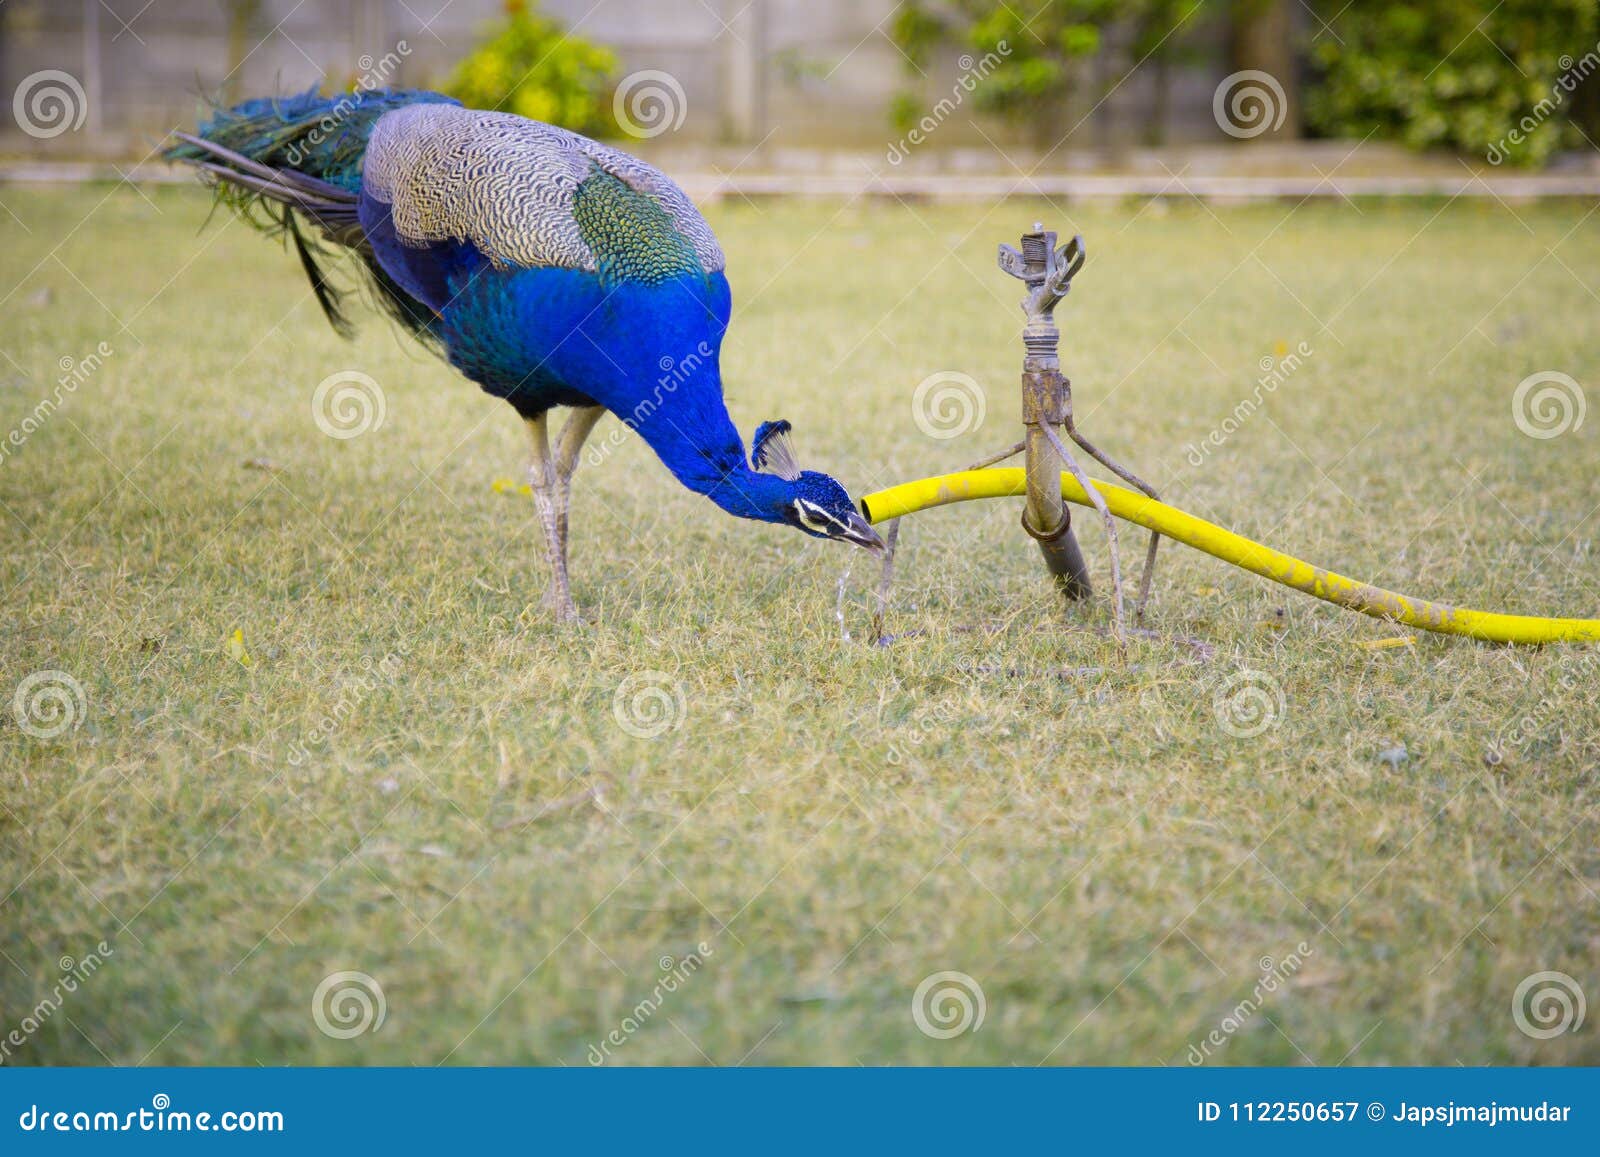 Peacock Drinking Water from Sprinkler Stock Image - Image of human,  peacock: 112250657